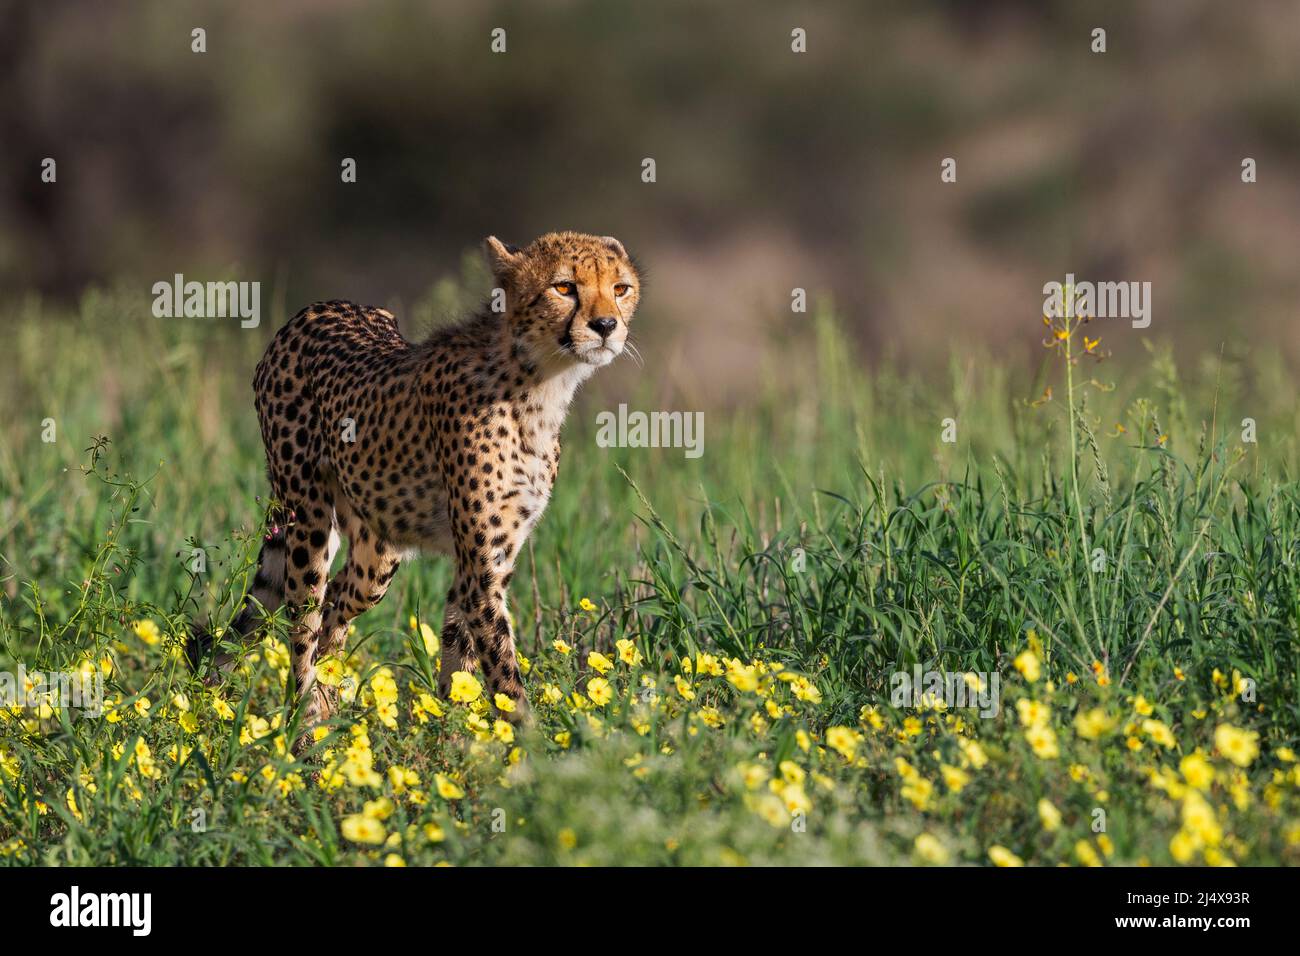 Young cheetah (Acinonyx jubatus) among devil's thorn flowers, Kgalagadi transfrontier park, Northern Cape, South Africa, February 2022 Stock Photo